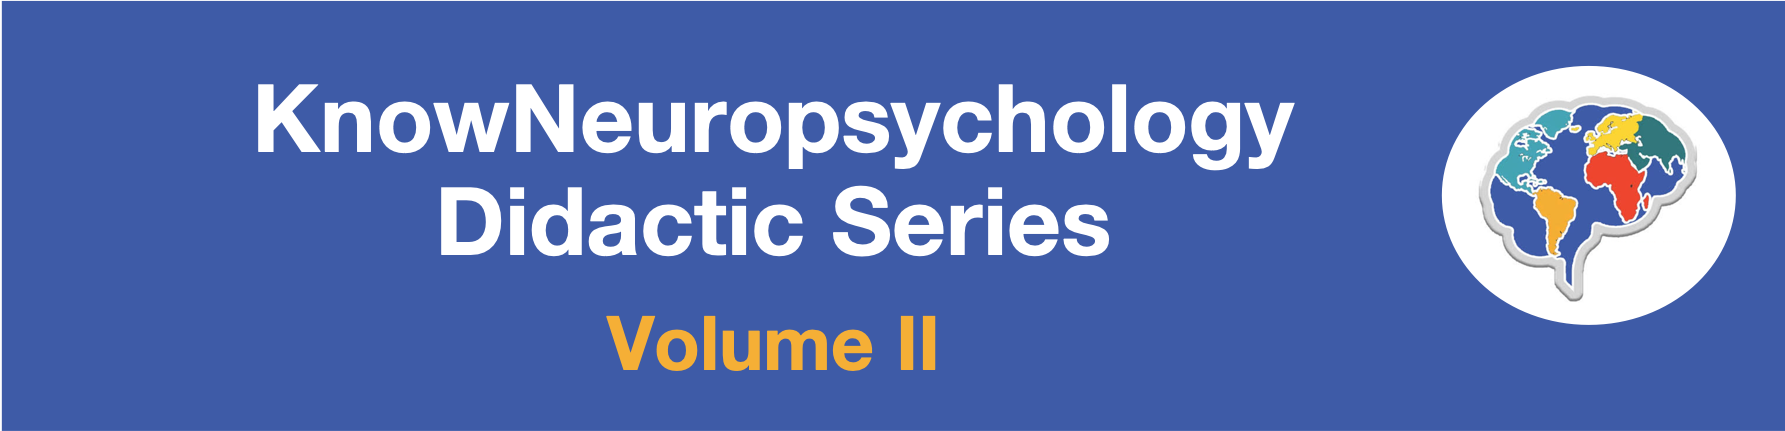 KnowNeuropsychology Didactic Series Volume 2